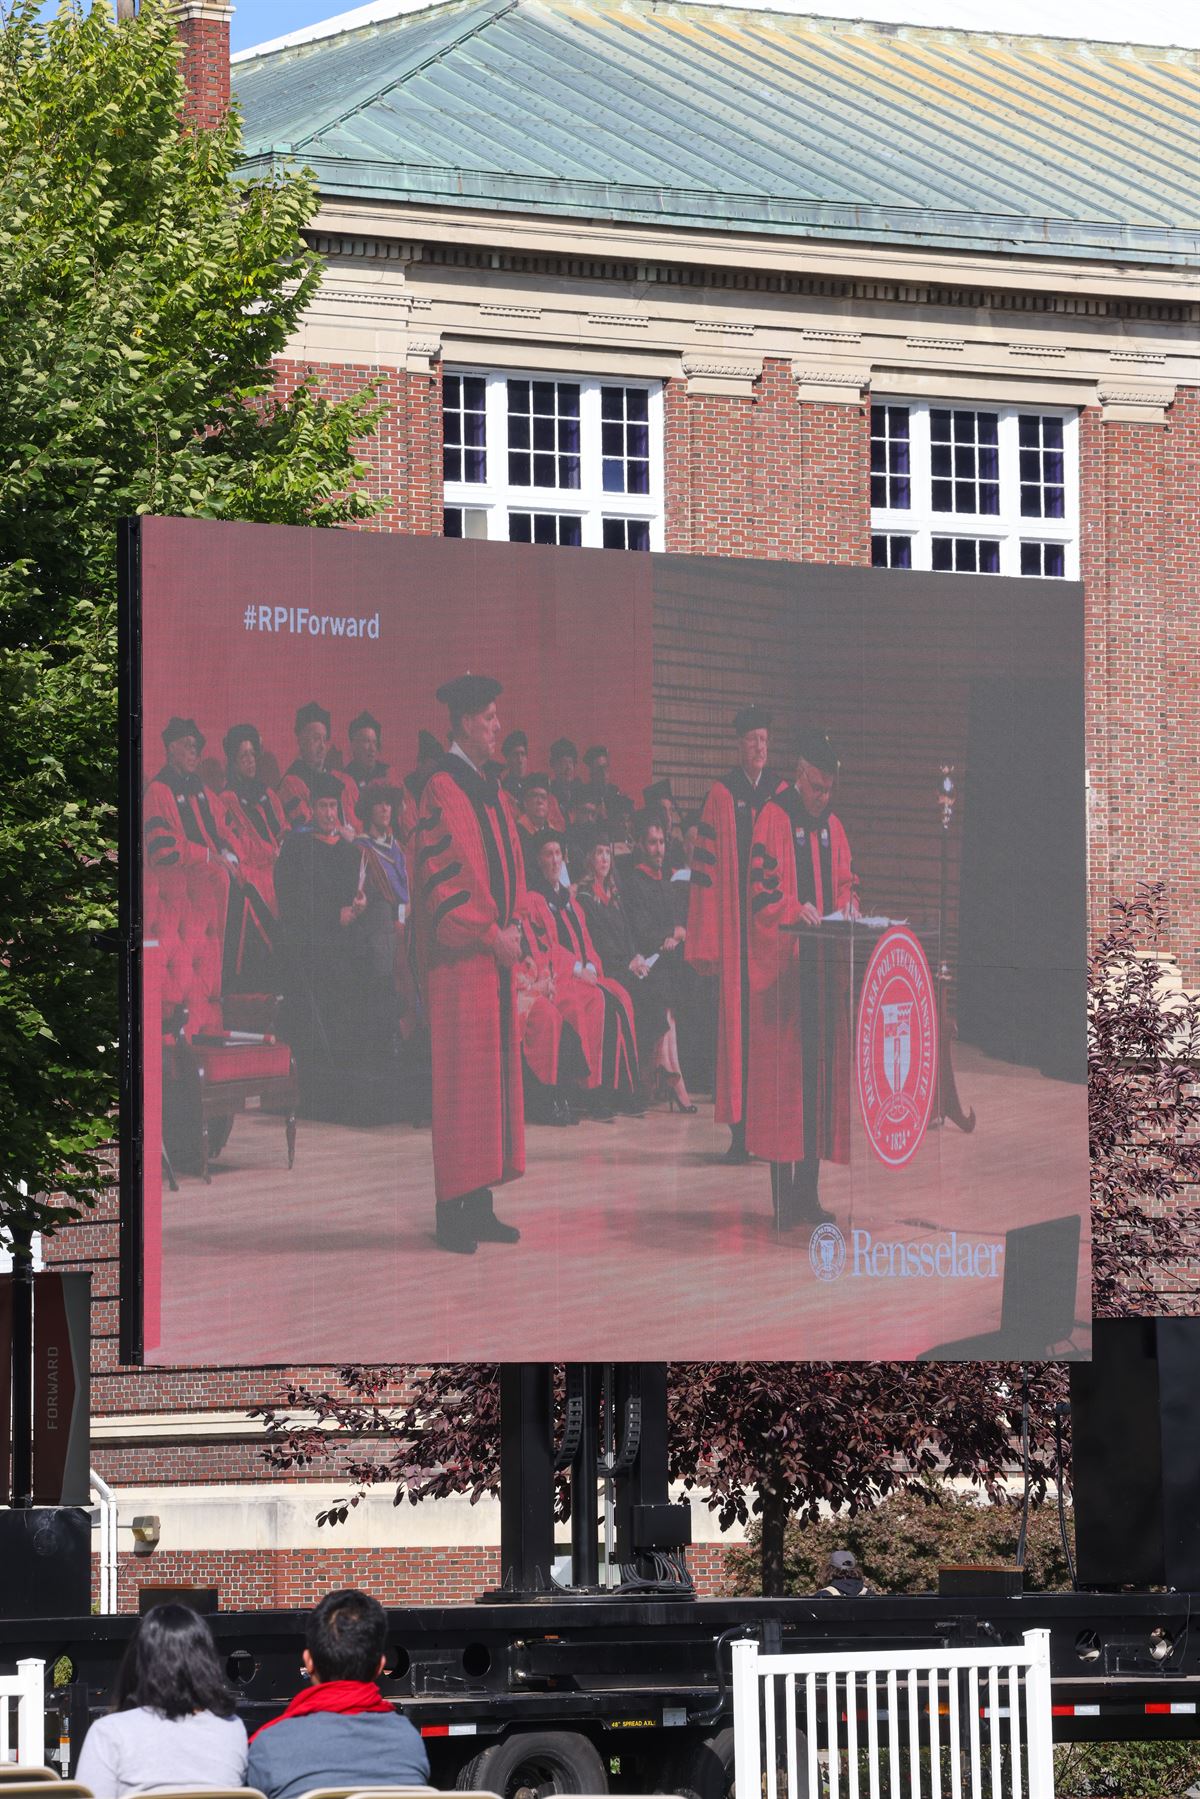 Video on President’s investiture on outdoor screen.